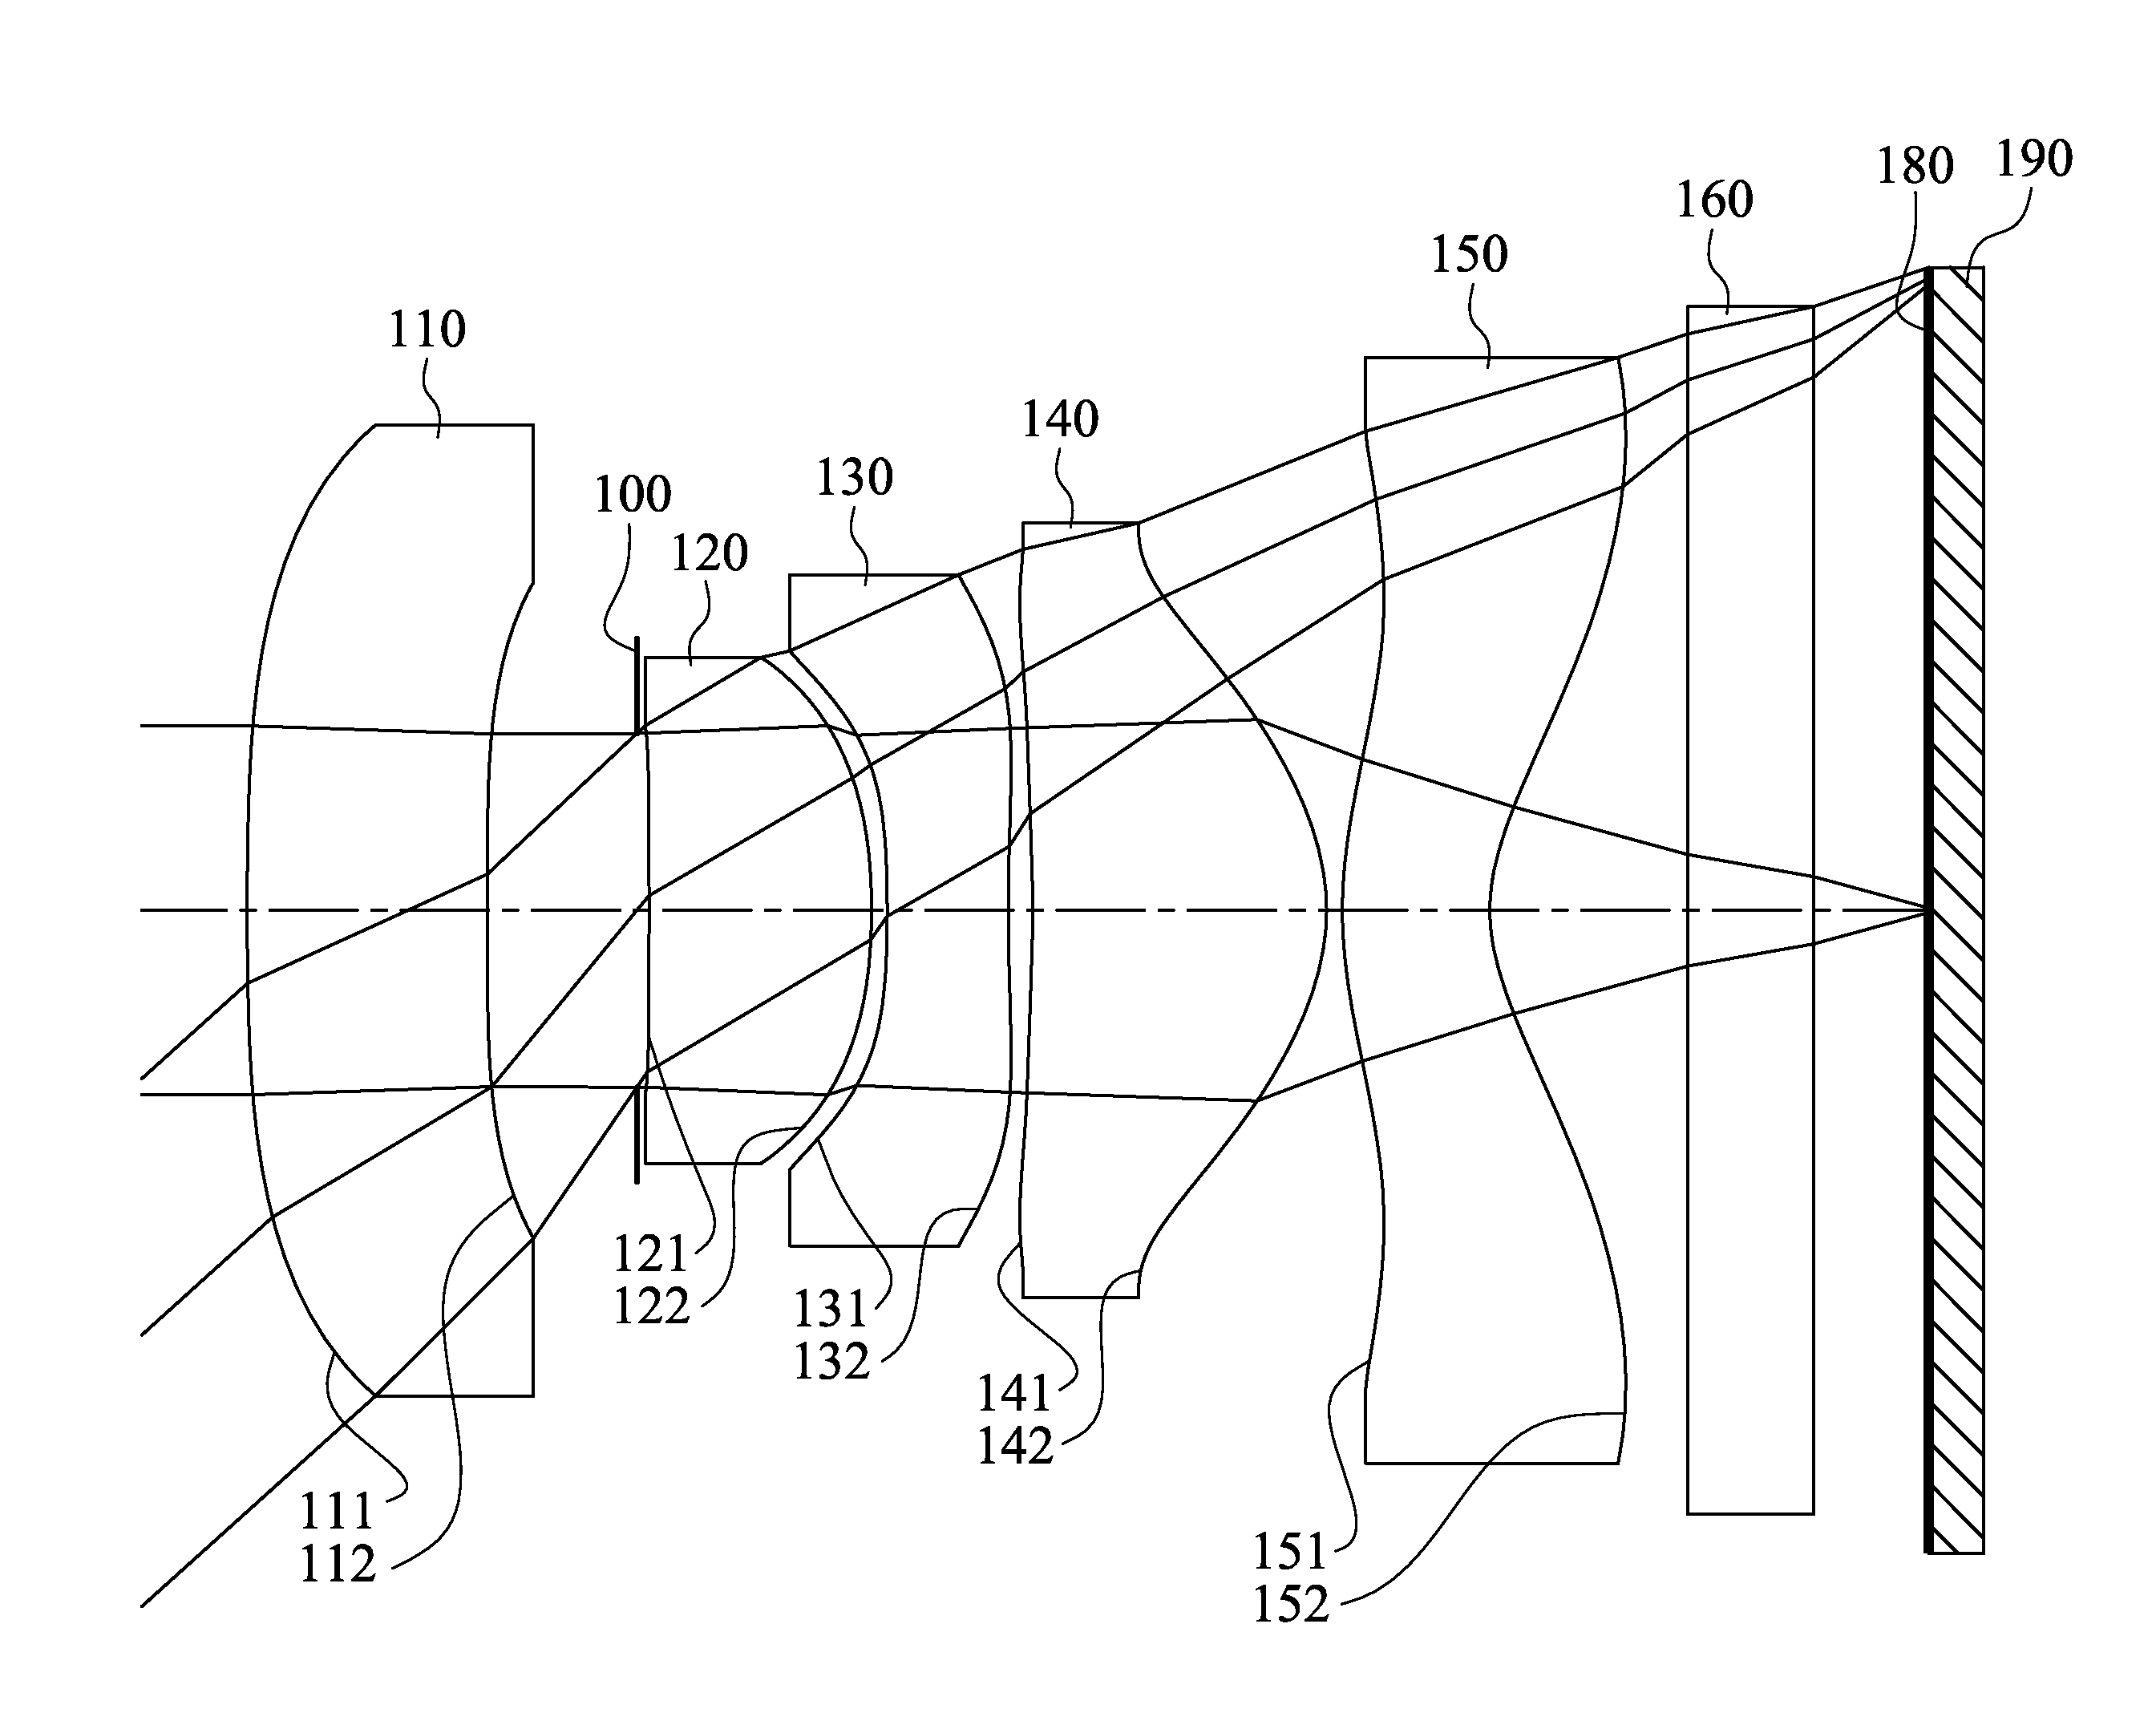 Imaging optical system, image capturing device and mobile terminal